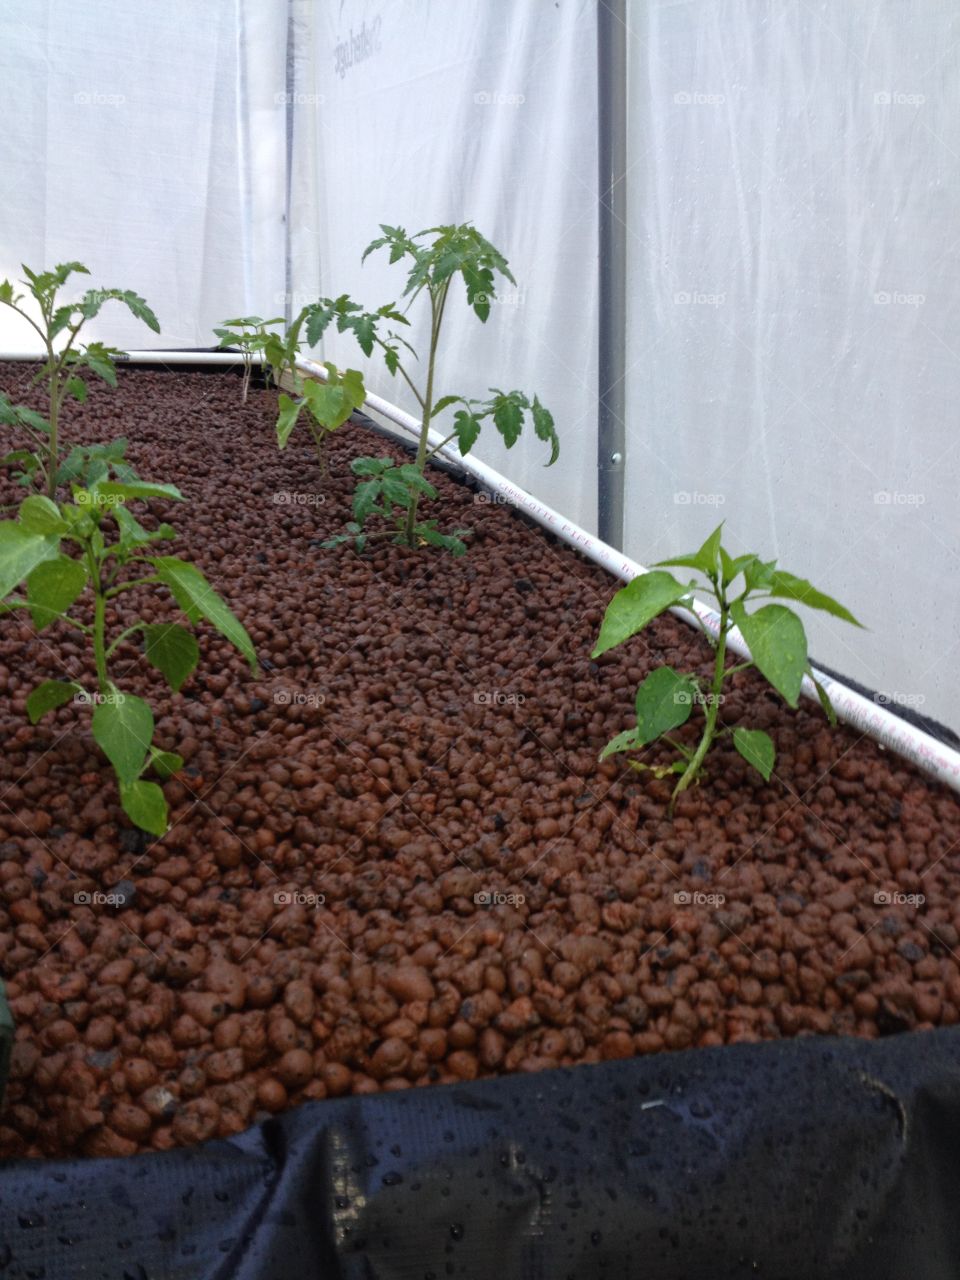 Hydroponic greenhouse tomato and pepper plants